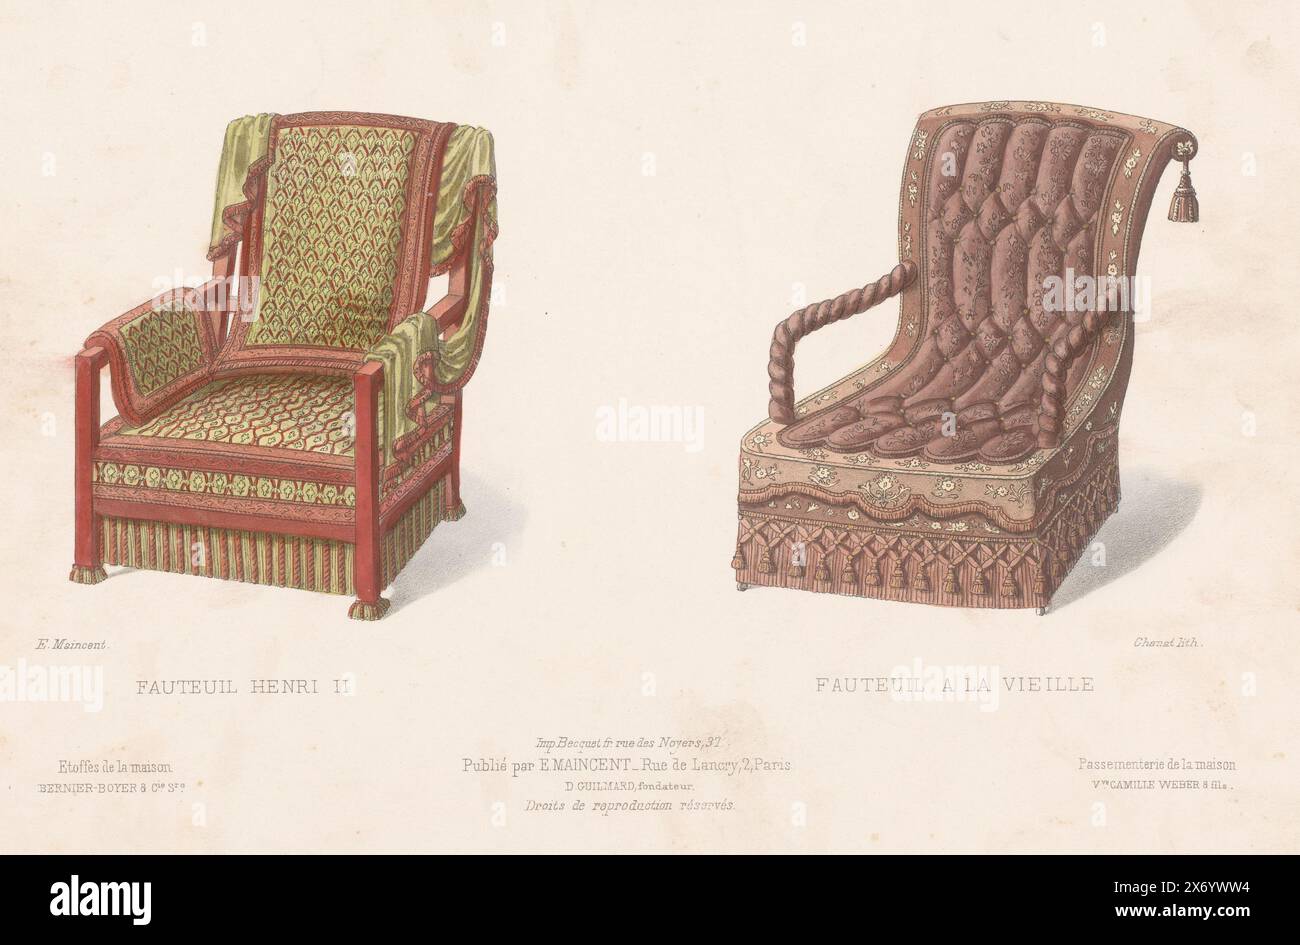 Two armchairs, Fauteuil Henri II, Fauteuil a la vieille (title on object), Le garde-meuble, Collection de Sièges (series title on object), Two armchairs, one of which in the Henry II style. Print from 295th Livraison., print, print maker: Chanat, (mentioned on object), printer: Becquet frères, (mentioned on object), publisher: Eugène Maincent, (mentioned on object), Paris, 1885 - 1895, paper, height, 275 mm × width, 358 mm Stock Photo